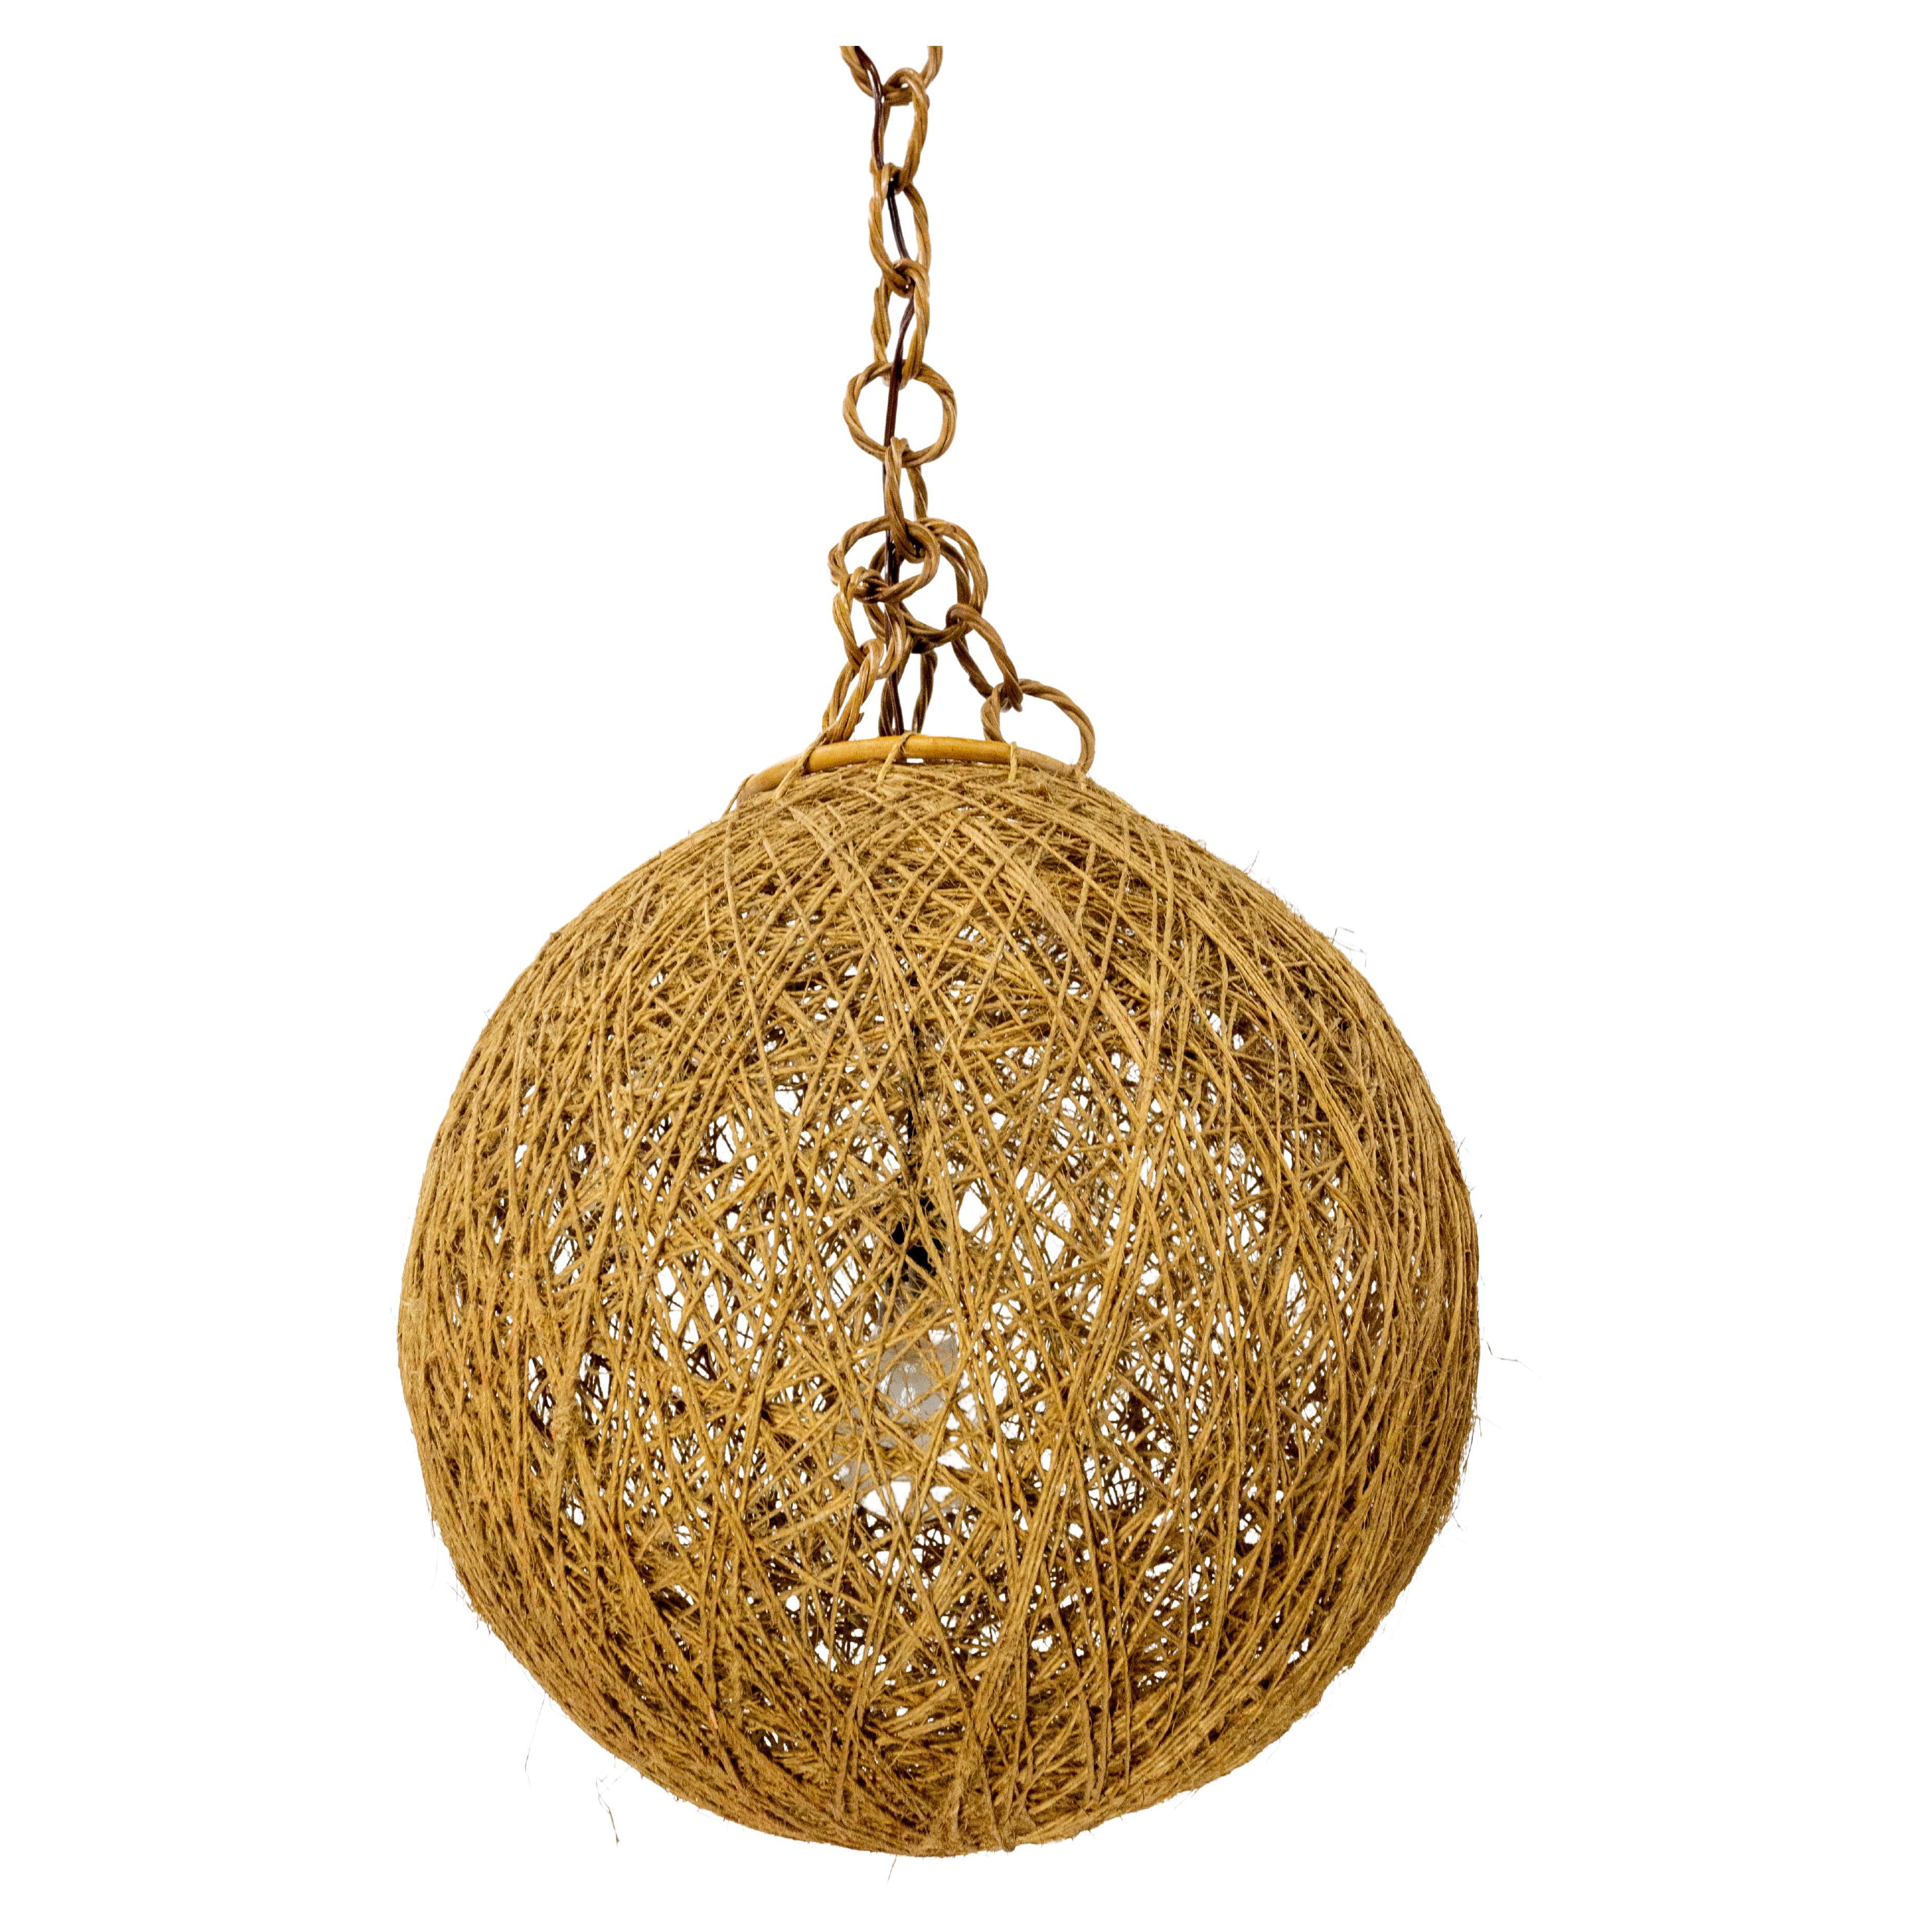 French Ceiling Pendant String and Wicker Chandelier, Lustre, circa 1970